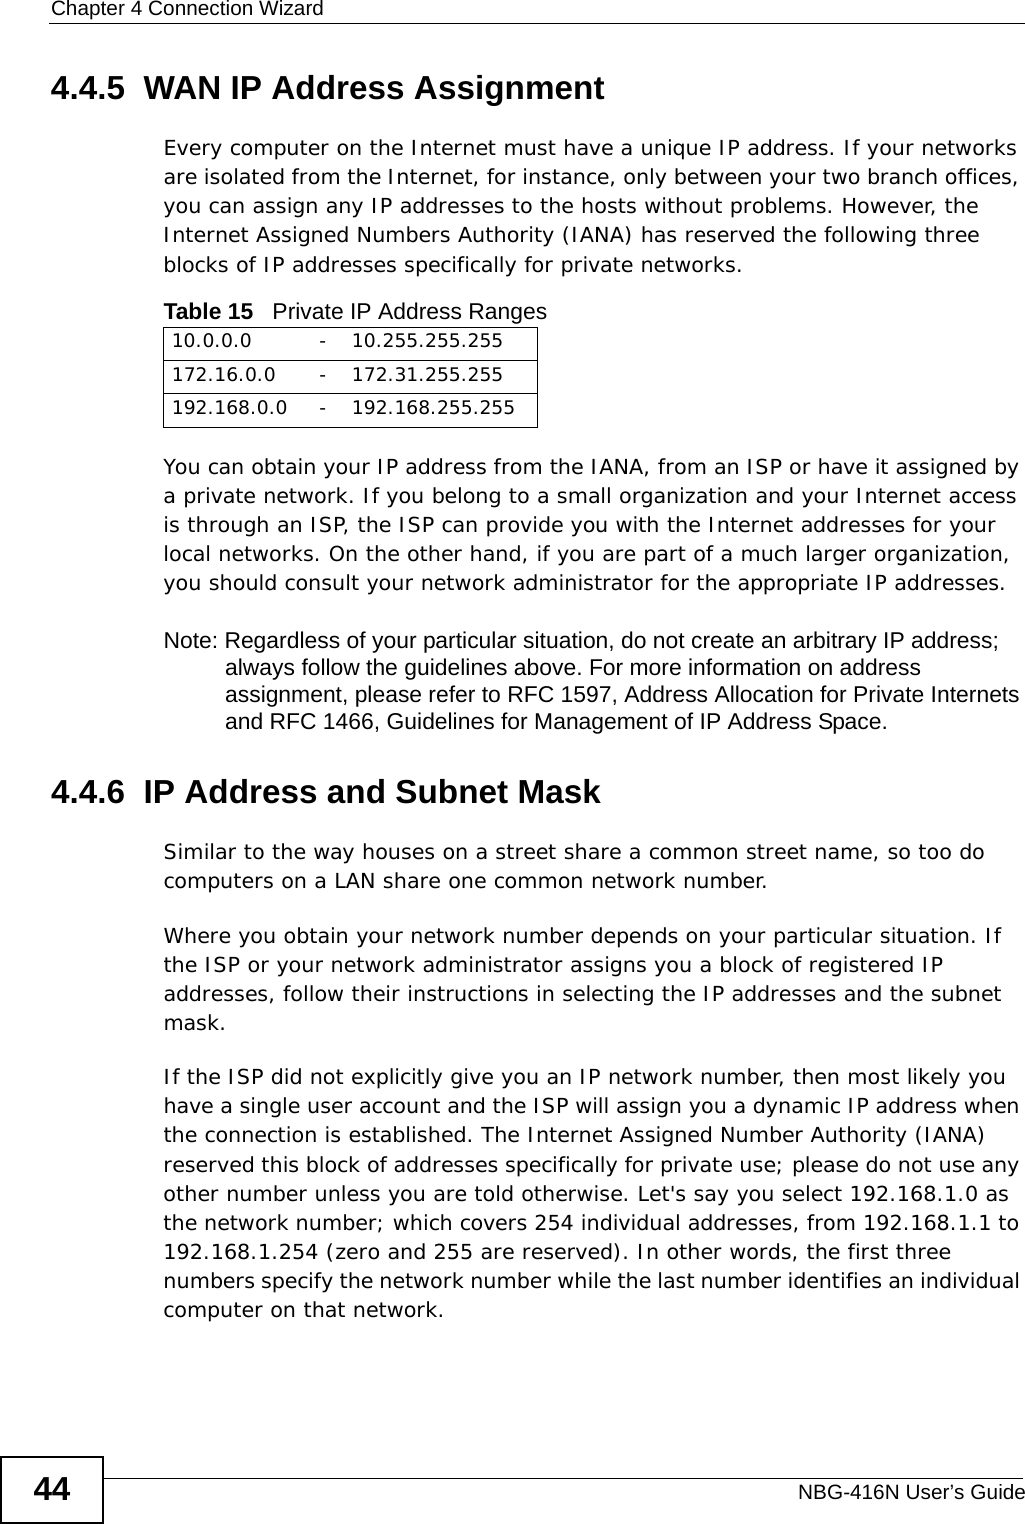 Chapter 4 Connection WizardNBG-416N User’s Guide444.4.5  WAN IP Address AssignmentEvery computer on the Internet must have a unique IP address. If your networks are isolated from the Internet, for instance, only between your two branch offices, you can assign any IP addresses to the hosts without problems. However, the Internet Assigned Numbers Authority (IANA) has reserved the following three blocks of IP addresses specifically for private networks.You can obtain your IP address from the IANA, from an ISP or have it assigned by a private network. If you belong to a small organization and your Internet access is through an ISP, the ISP can provide you with the Internet addresses for your local networks. On the other hand, if you are part of a much larger organization, you should consult your network administrator for the appropriate IP addresses.Note: Regardless of your particular situation, do not create an arbitrary IP address; always follow the guidelines above. For more information on address assignment, please refer to RFC 1597, Address Allocation for Private Internets and RFC 1466, Guidelines for Management of IP Address Space.4.4.6  IP Address and Subnet MaskSimilar to the way houses on a street share a common street name, so too do computers on a LAN share one common network number.Where you obtain your network number depends on your particular situation. If the ISP or your network administrator assigns you a block of registered IP addresses, follow their instructions in selecting the IP addresses and the subnet mask.If the ISP did not explicitly give you an IP network number, then most likely you have a single user account and the ISP will assign you a dynamic IP address when the connection is established. The Internet Assigned Number Authority (IANA) reserved this block of addresses specifically for private use; please do not use any other number unless you are told otherwise. Let&apos;s say you select 192.168.1.0 as the network number; which covers 254 individual addresses, from 192.168.1.1 to 192.168.1.254 (zero and 255 are reserved). In other words, the first three numbers specify the network number while the last number identifies an individual computer on that network.Table 15   Private IP Address Ranges10.0.0.0 -10.255.255.255172.16.0.0 -172.31.255.255192.168.0.0 -192.168.255.255